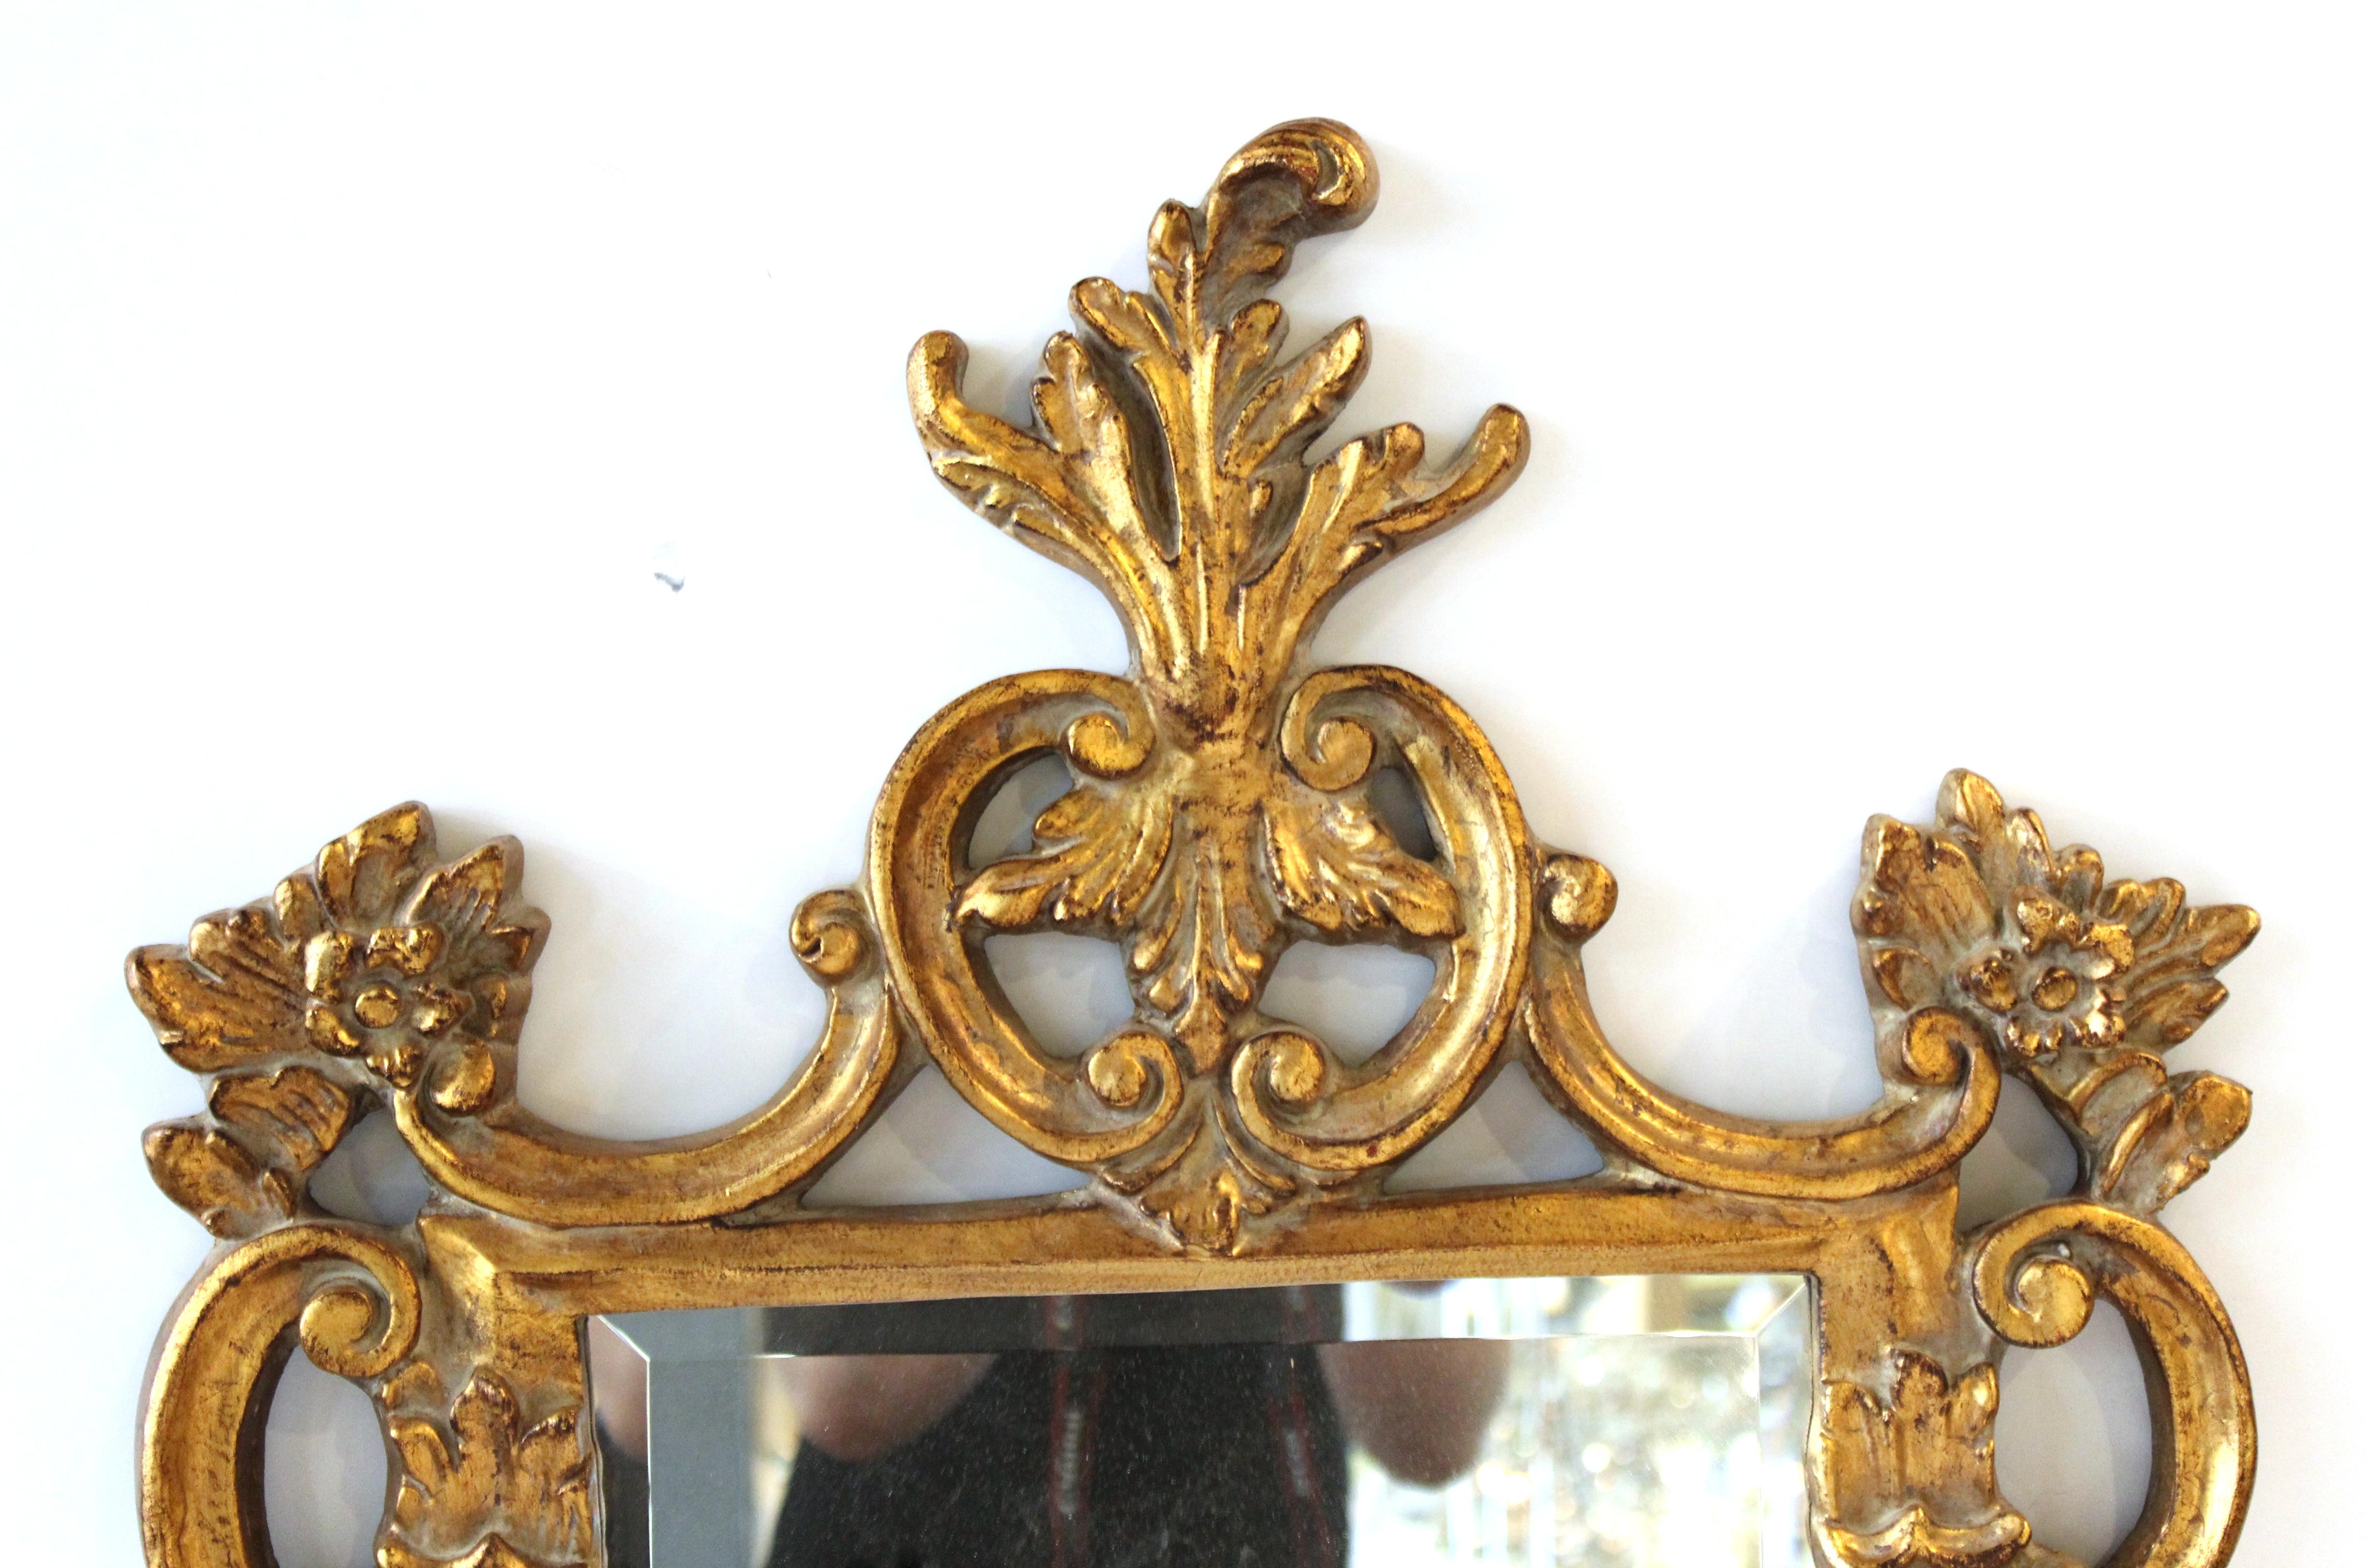 Hollywood Regency Baroque style wall mirror with ornamental giltwood frame with swags and foliage. The piece is in great vintage condition with age-appropriate wear.